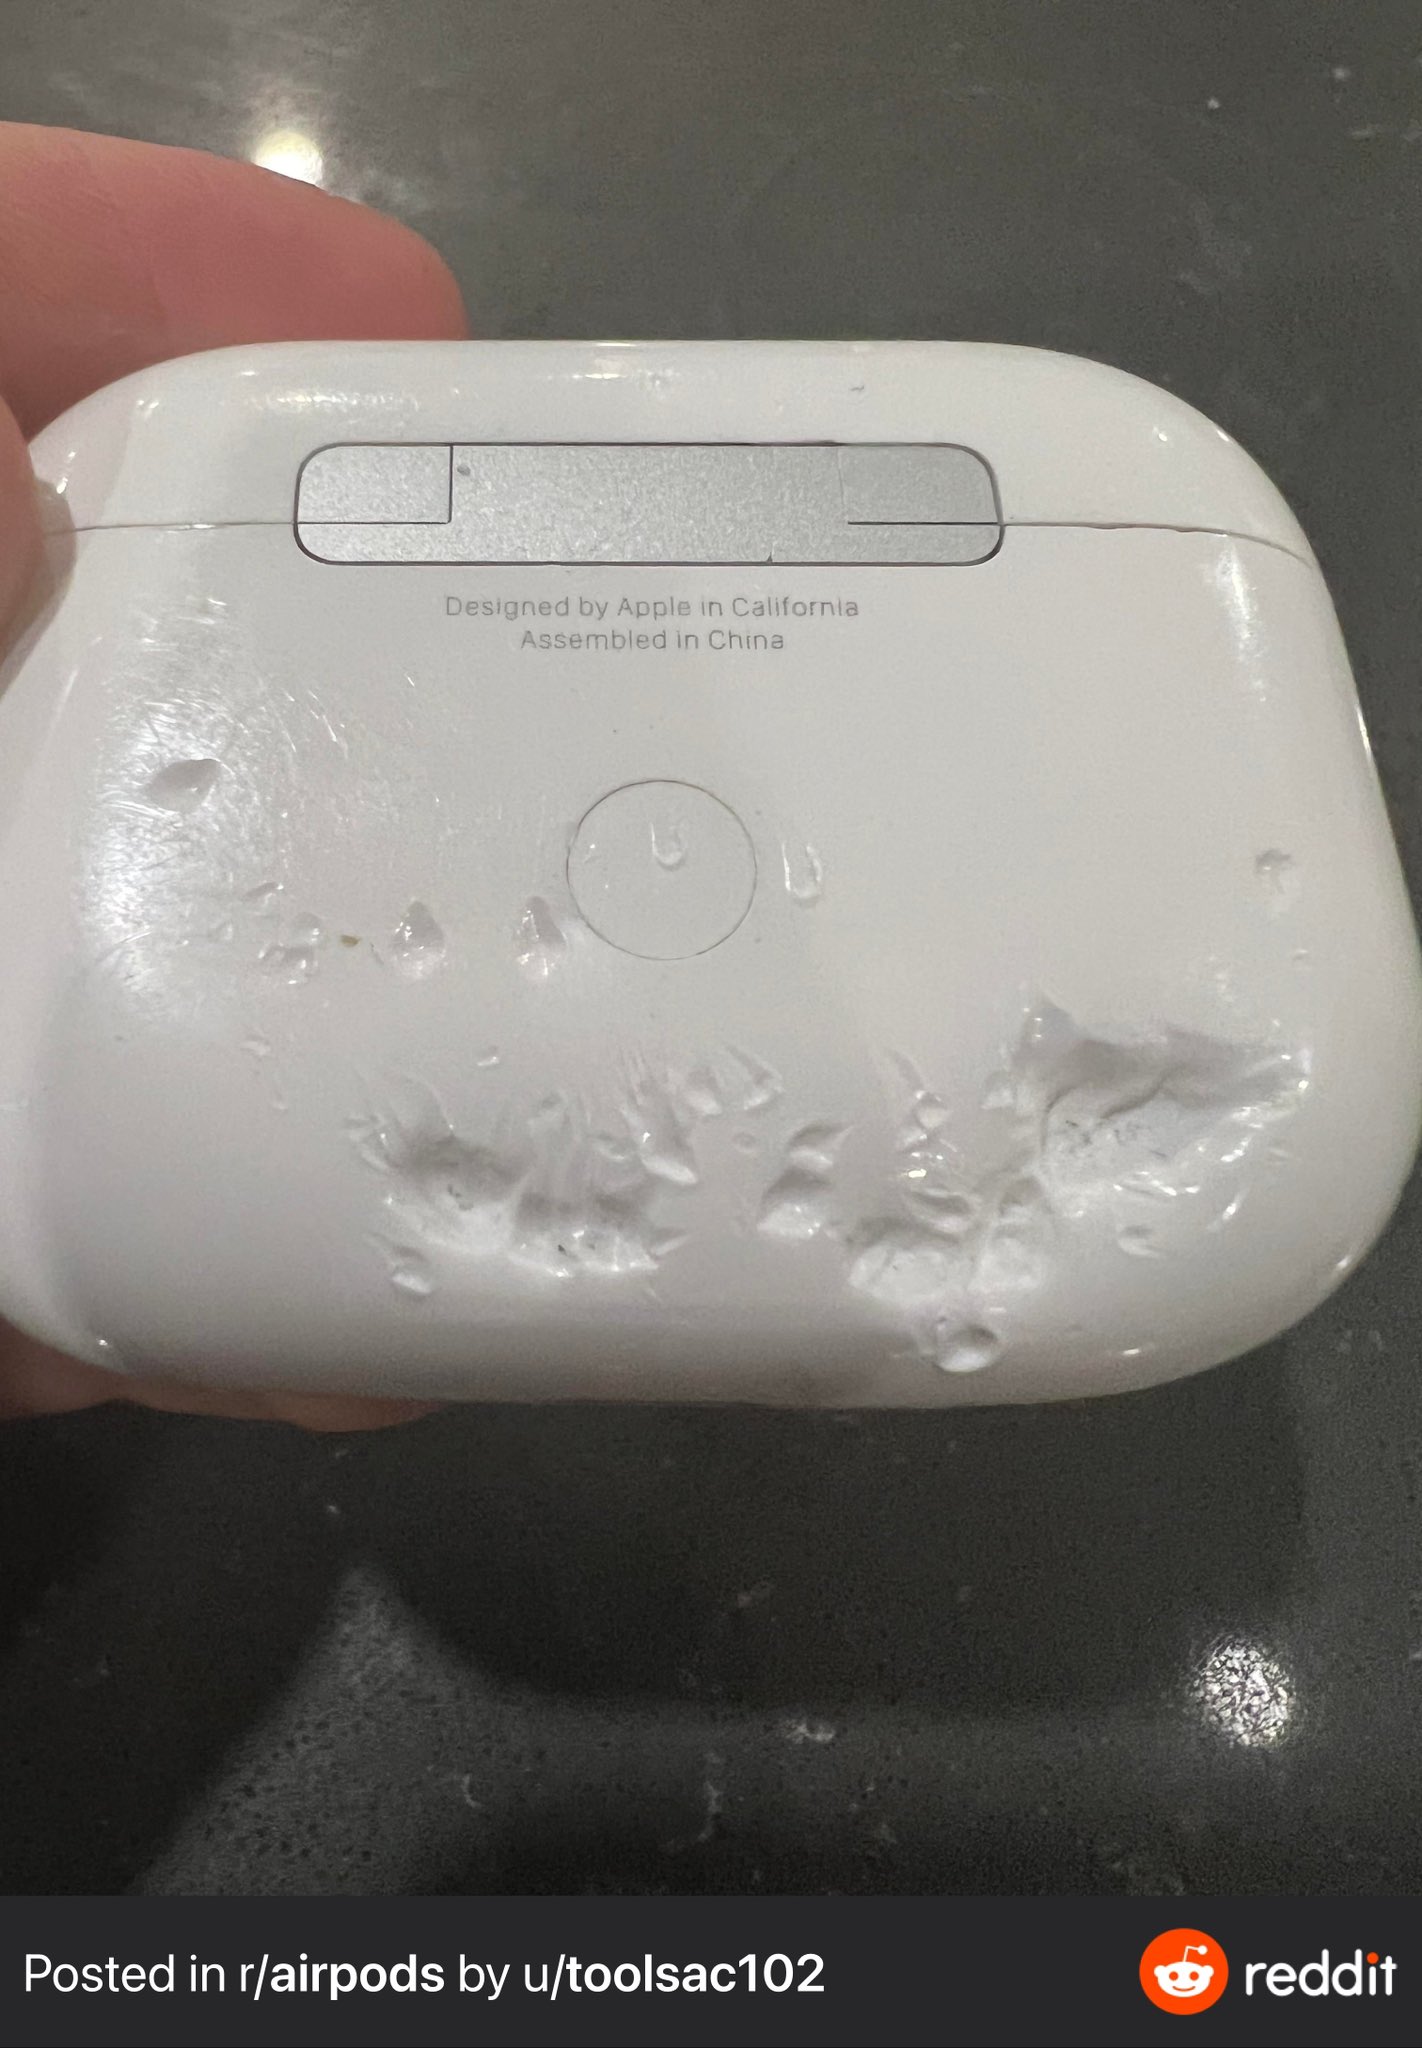 hylde firkant modtagende Liandr on Twitter: "A little nightmare 😩 AirPods chewed by dog. What would  be your reaction if you happened to have your AirPods case damaged like  this? https://t.co/csCk8eL89I" / Twitter